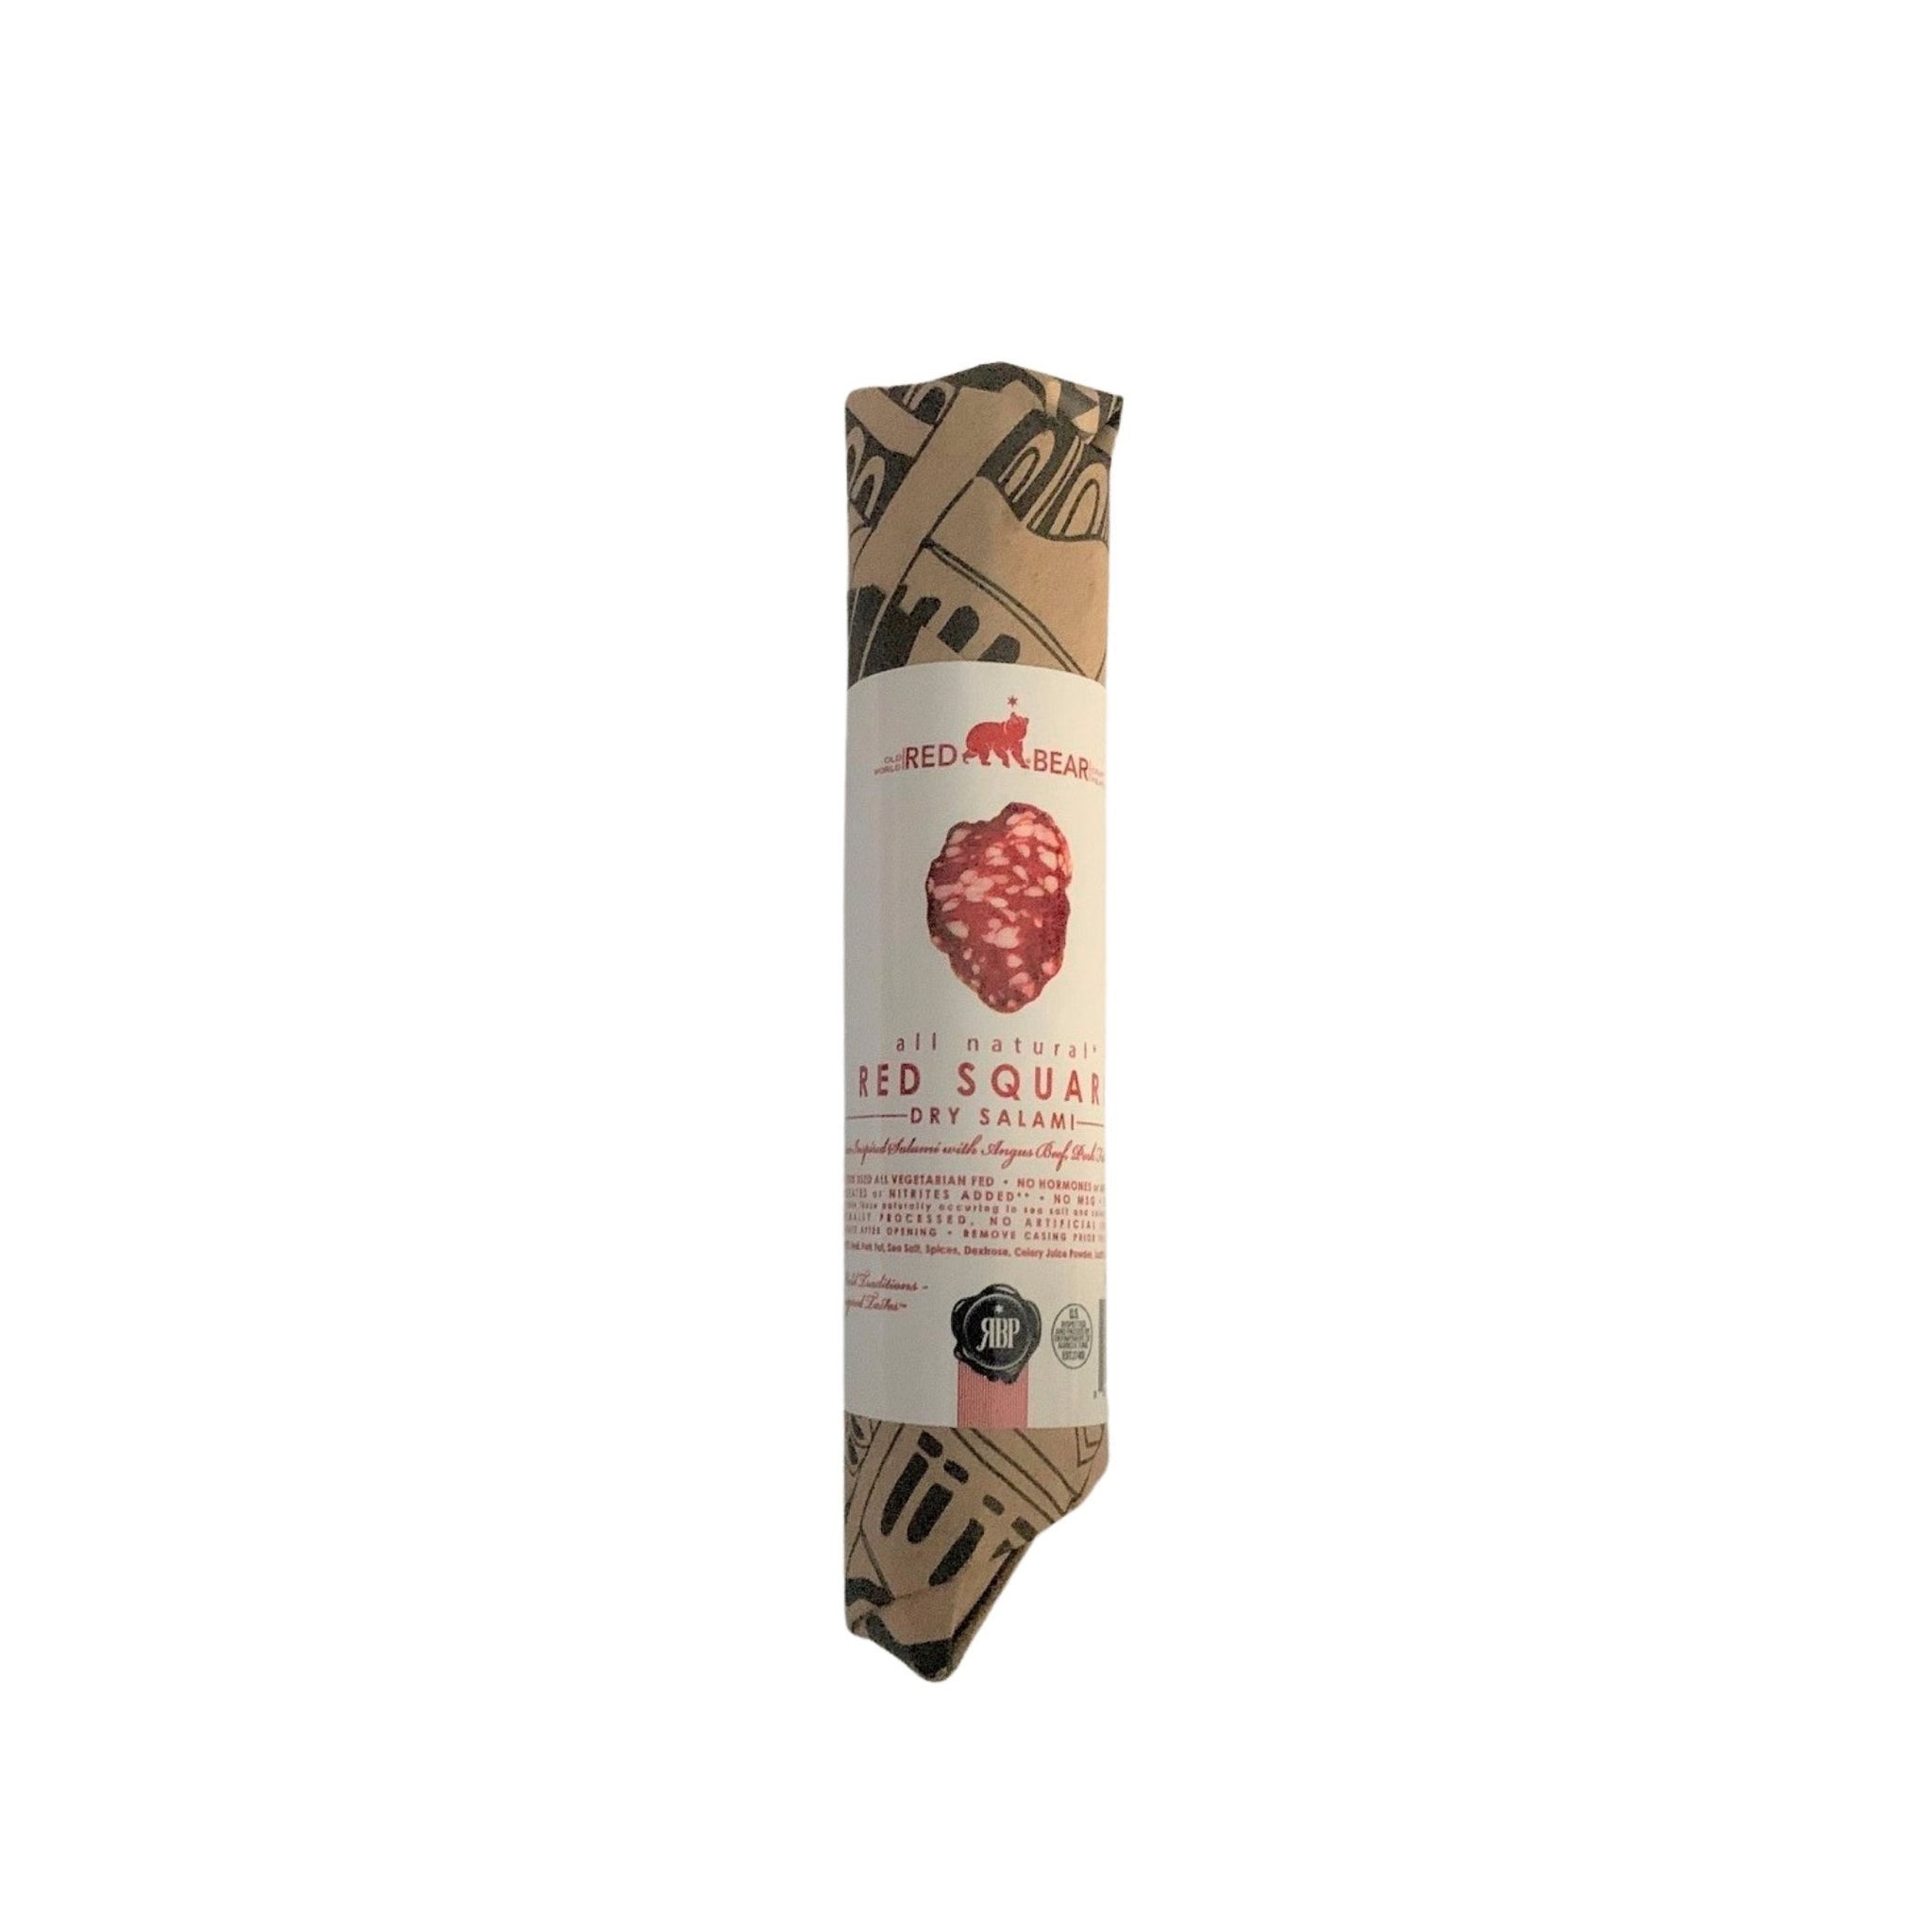 Red Bear Red Square Dry Salami 6oz